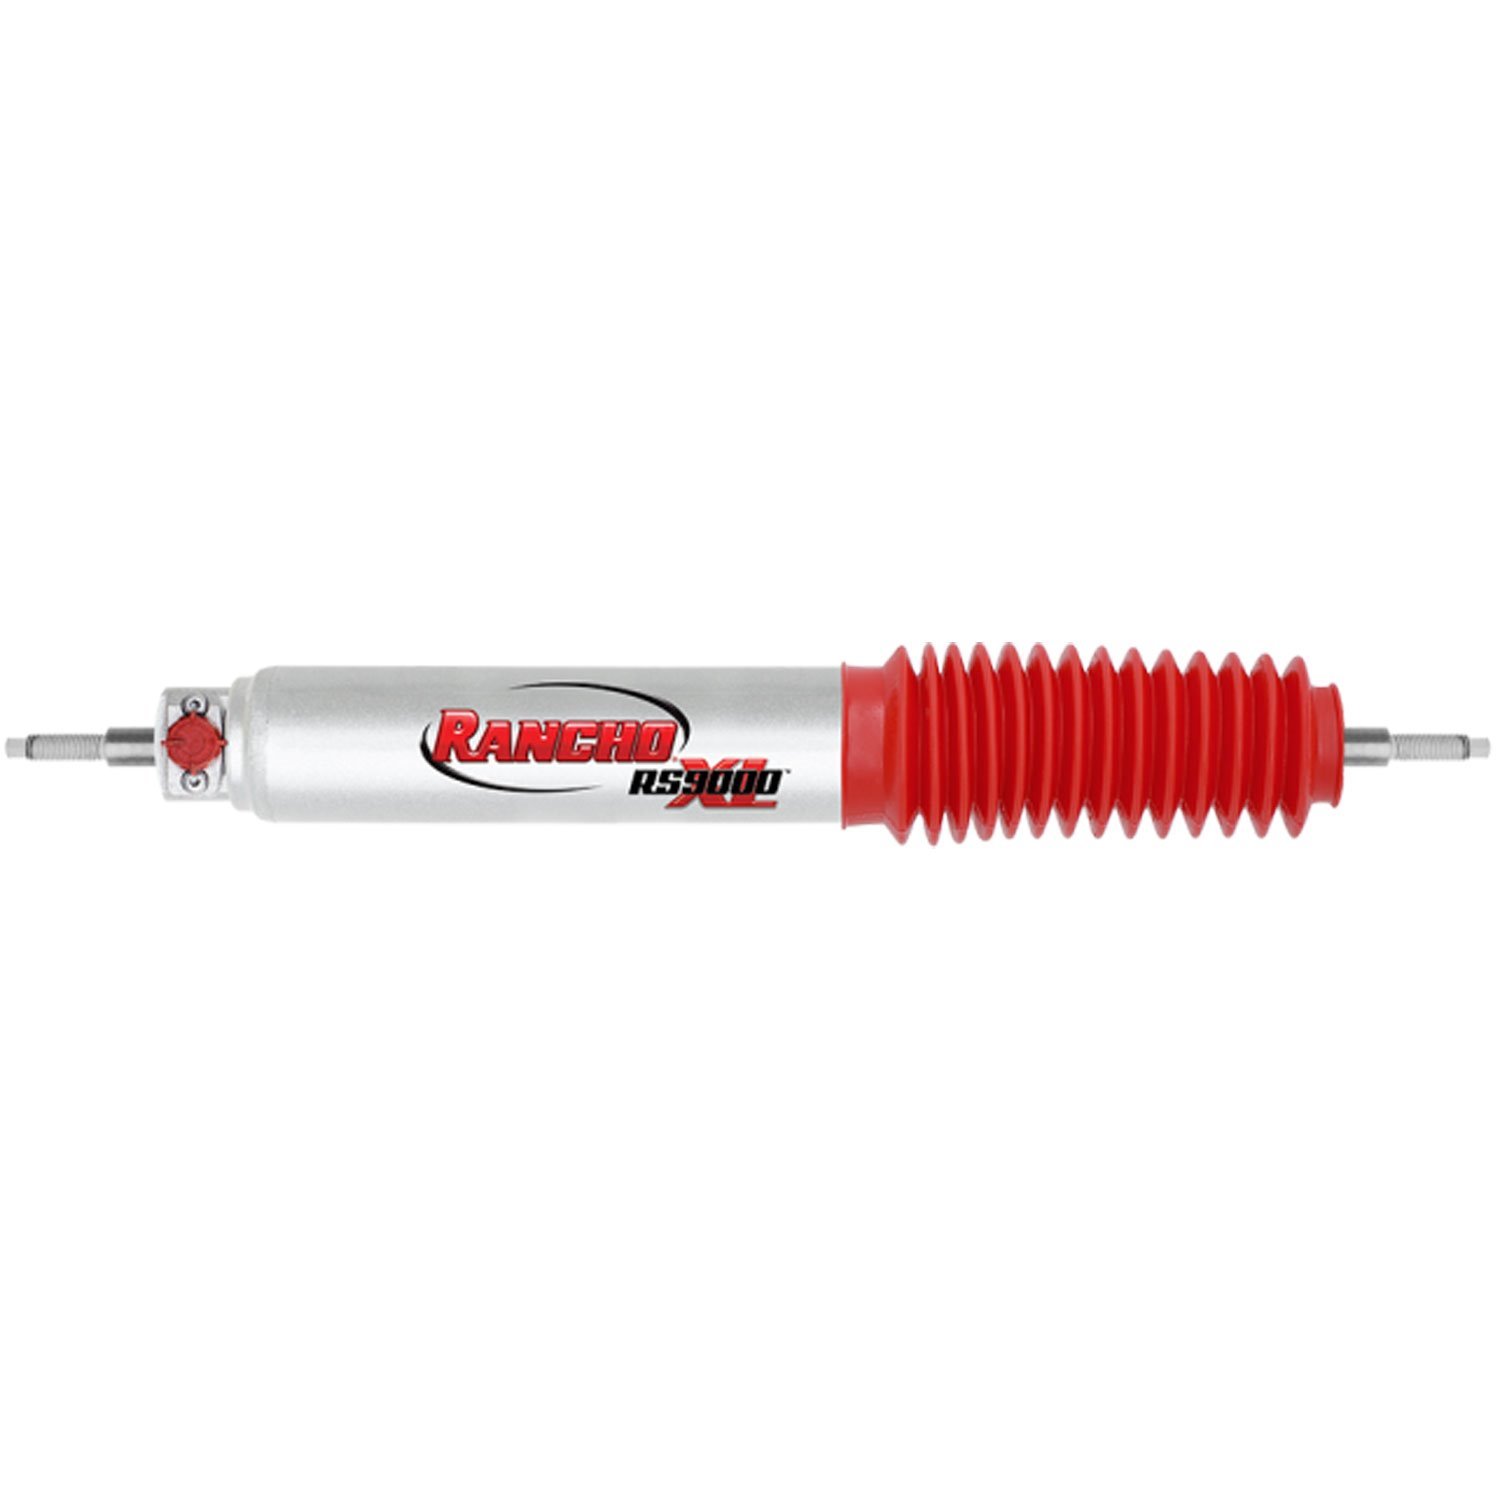 RS9000XL Front Shock Absorber Fits Toyota Land Cruiser and Lexus LX450/LX470